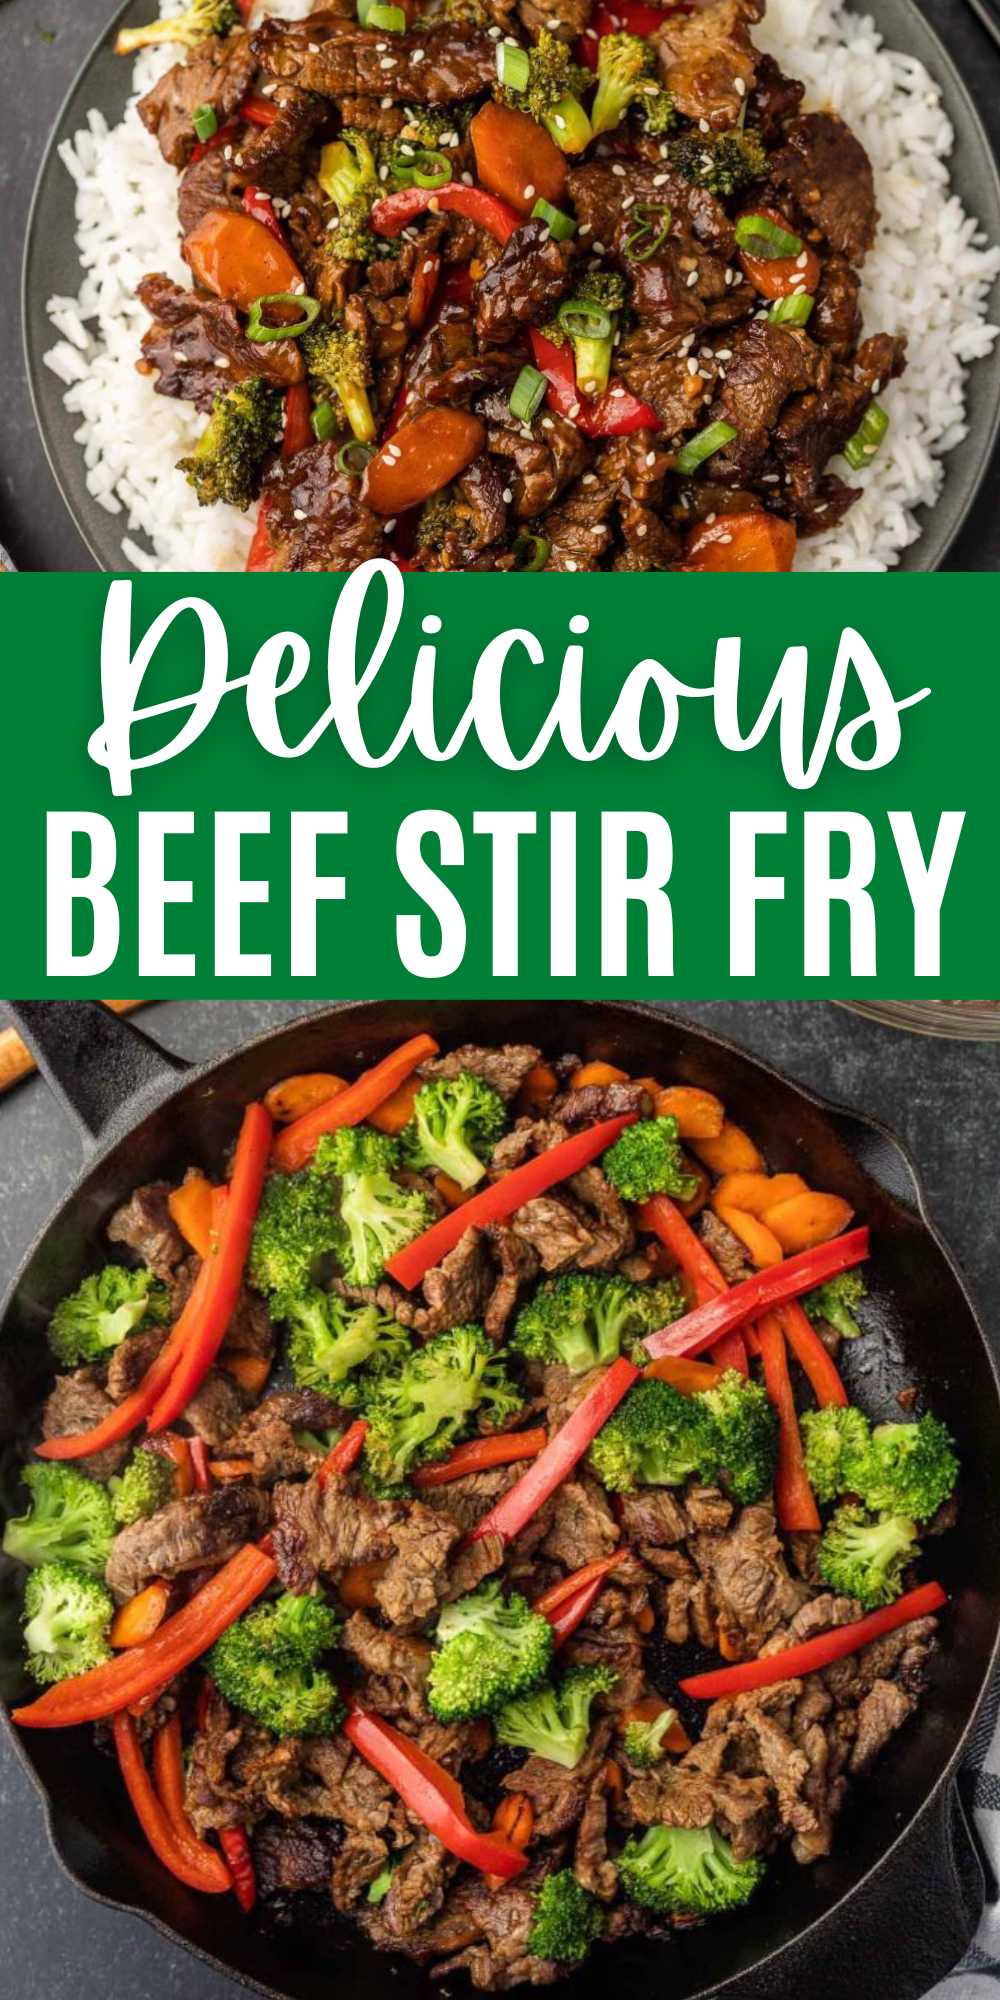 Skip take out and make this easy Beef Stir Fry Recipe. In just minutes, this meal with flavorful veggies and beef will be ready to enjoy. You can serve this straight from the skillet or add a side of white rice. This beef stir fry recipe is the perfect weeknight dinner. #eatingonadime #easybeefstirfryrecipe #beefstirfry